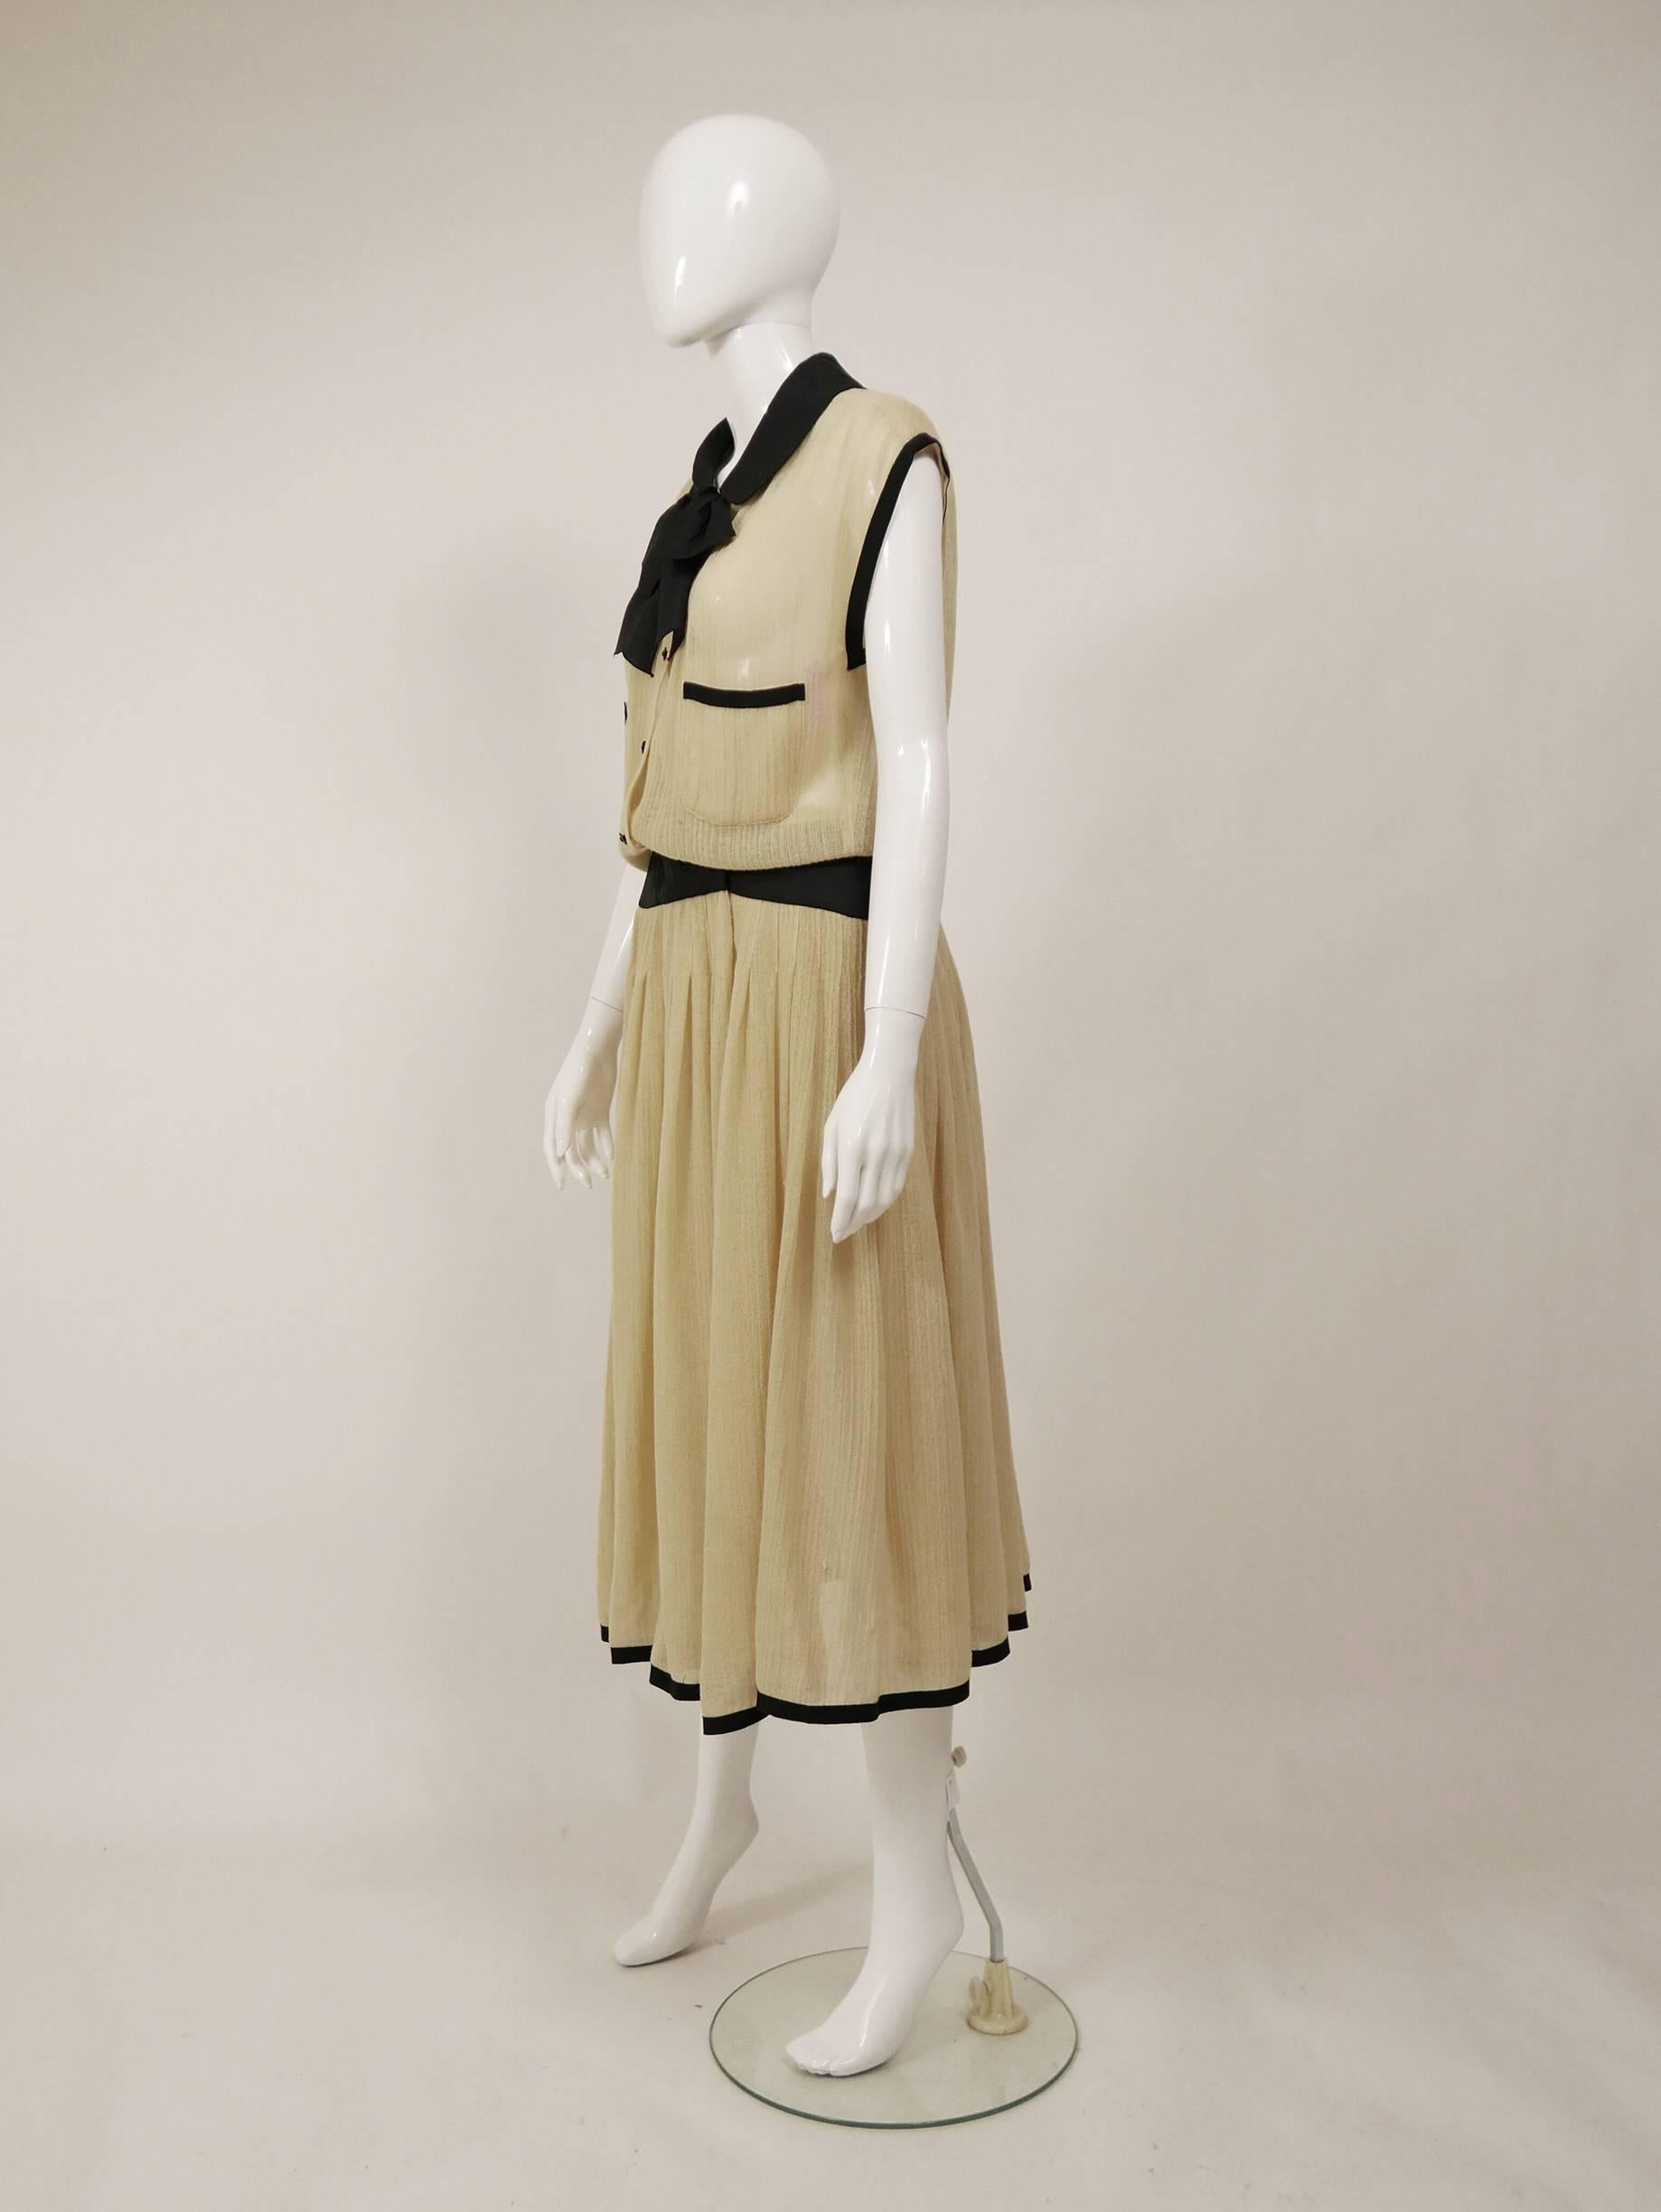 This lovely Chanel day dress is in a cream knitted woolen fabric with black satin details. It has buttons closure and hooks on the waistband.

Very good vintage condition 

Label: Chanel Boutique
Fabric: wool/silk
Color: